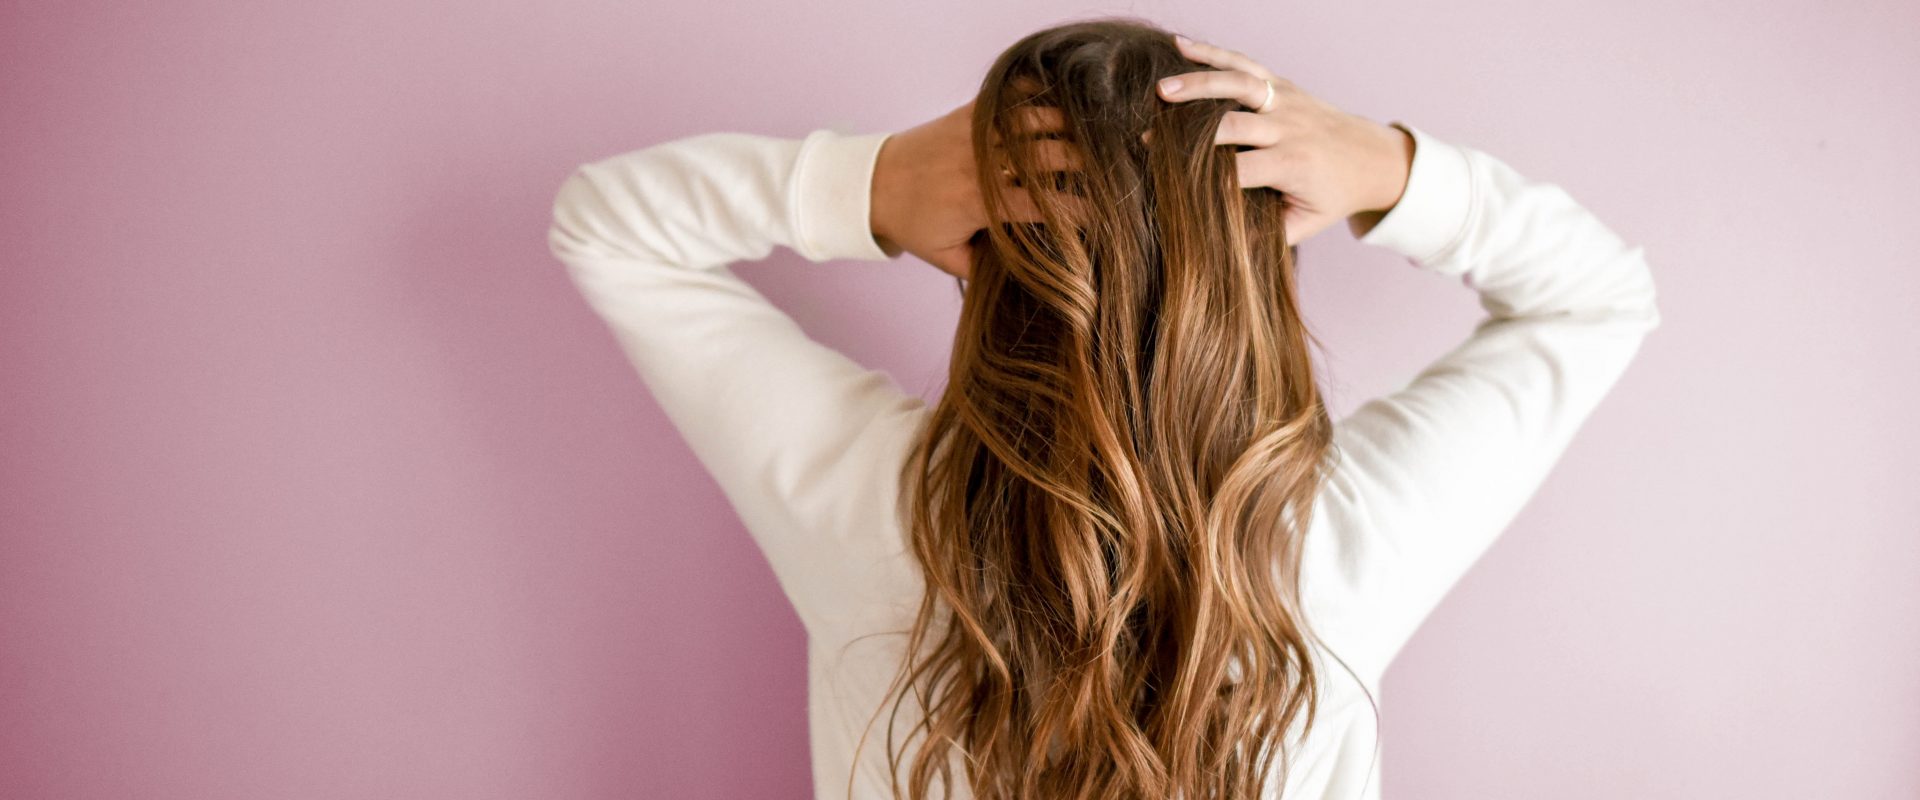 Woman with hands in hair in front of a pink wall